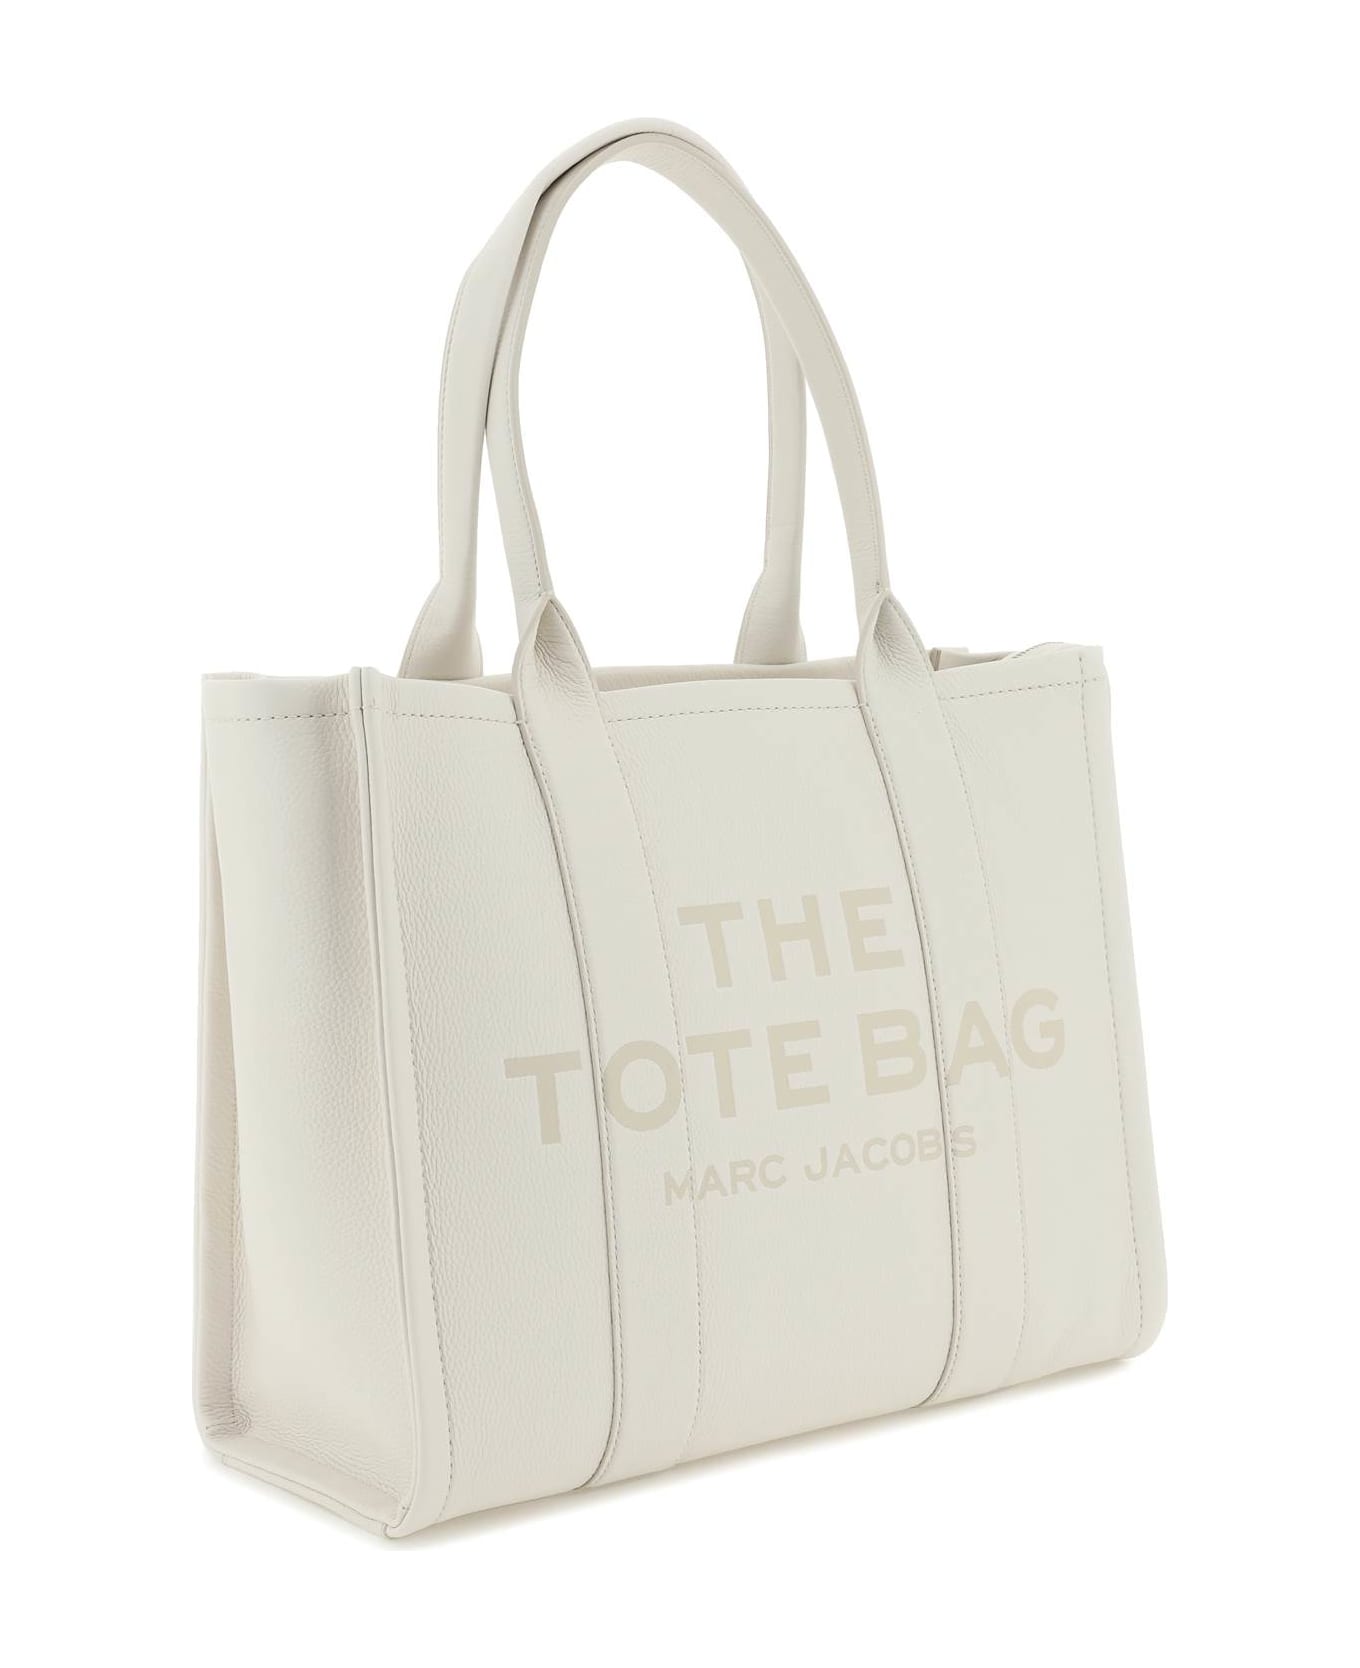 Marc Jacobs Leather Tote Bag - Cream トートバッグ